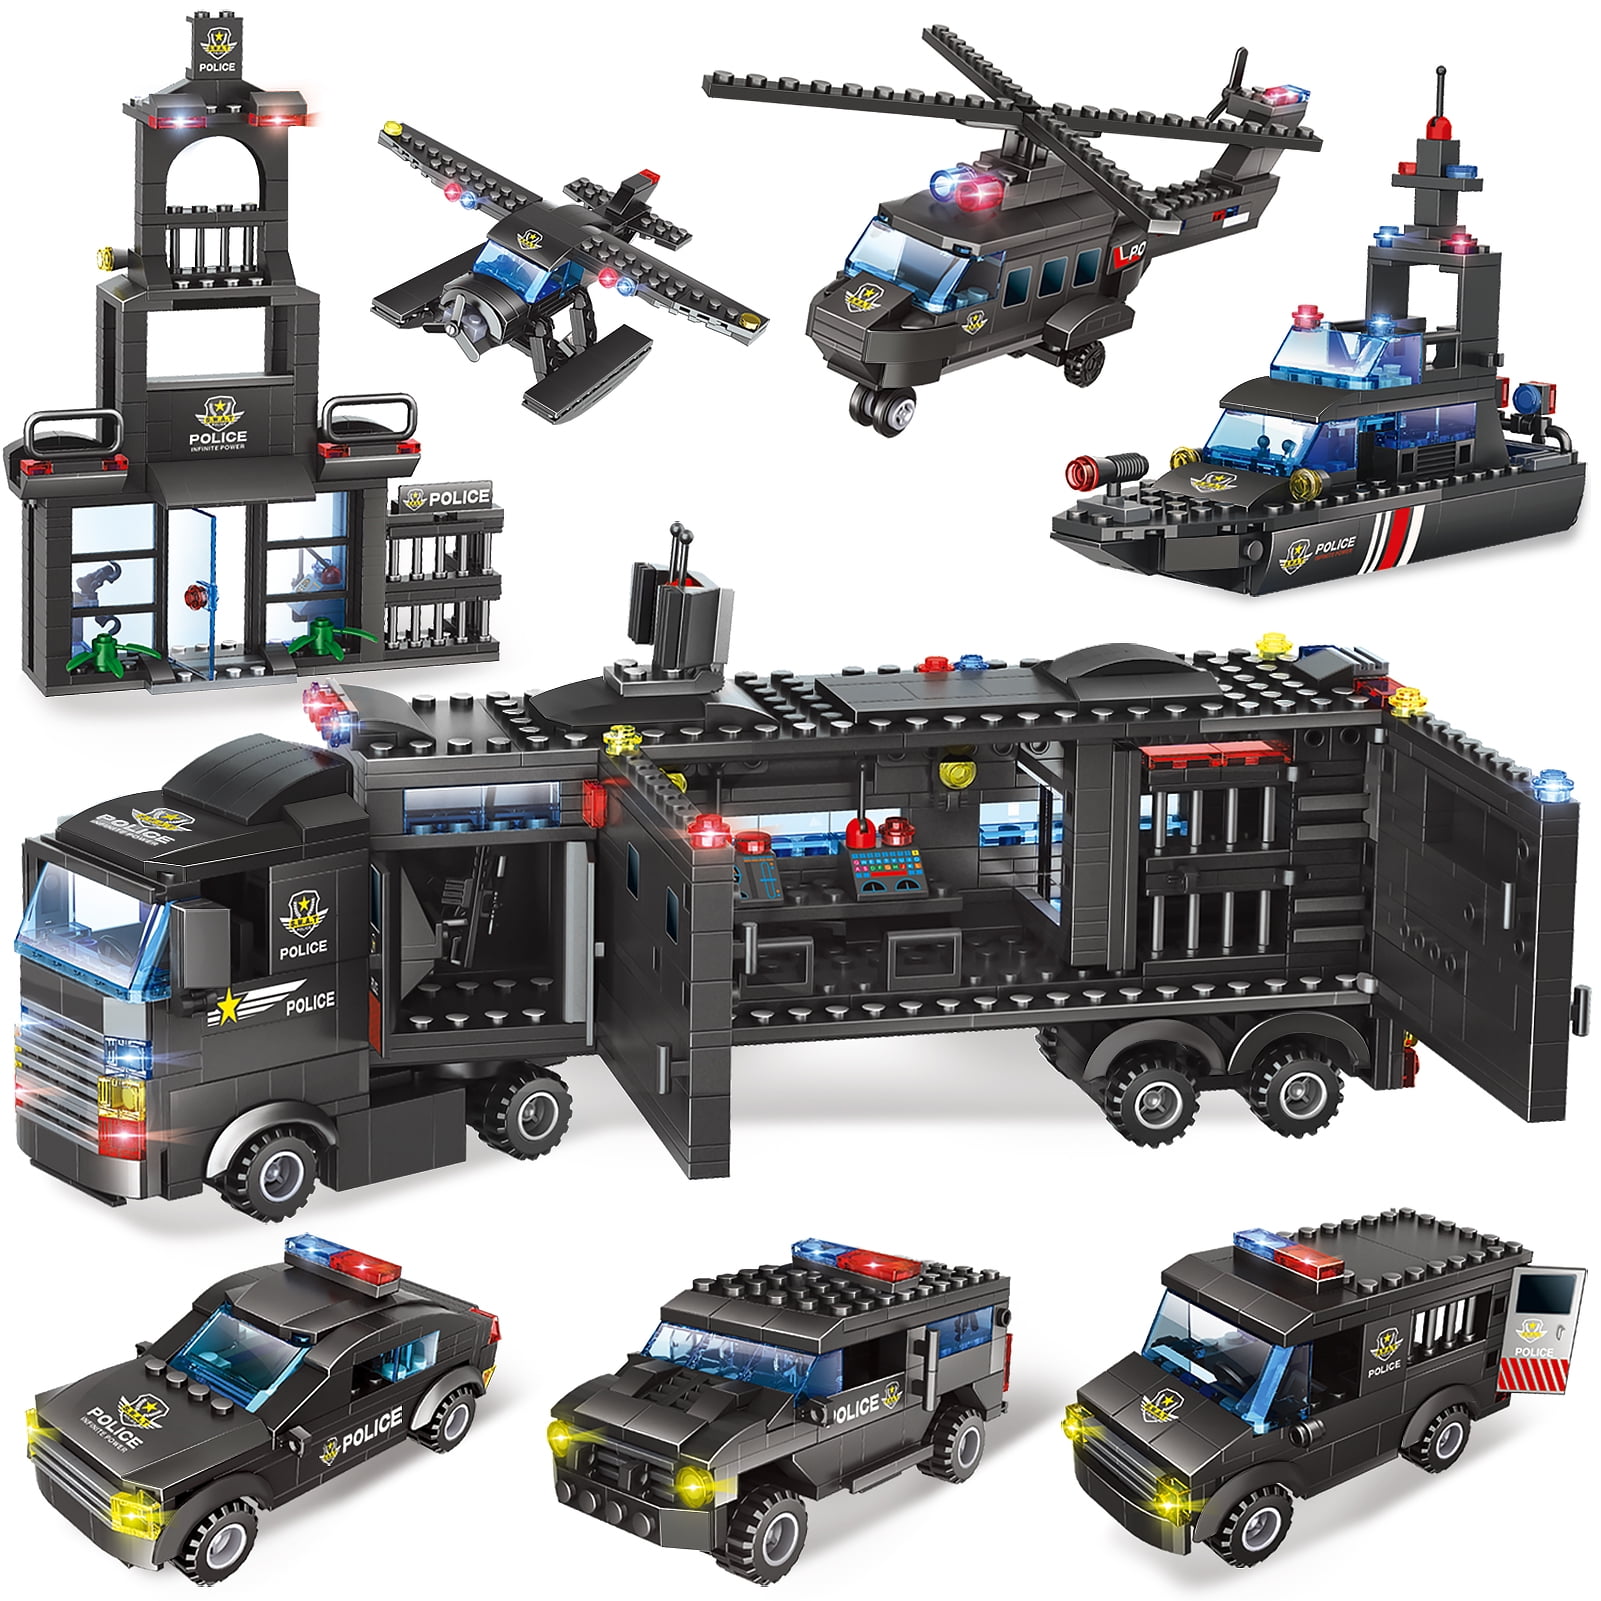 792 pcs Police Building Blocks Toy Set 8-in-1 Robot Truck Aircraft Car Boat Army 